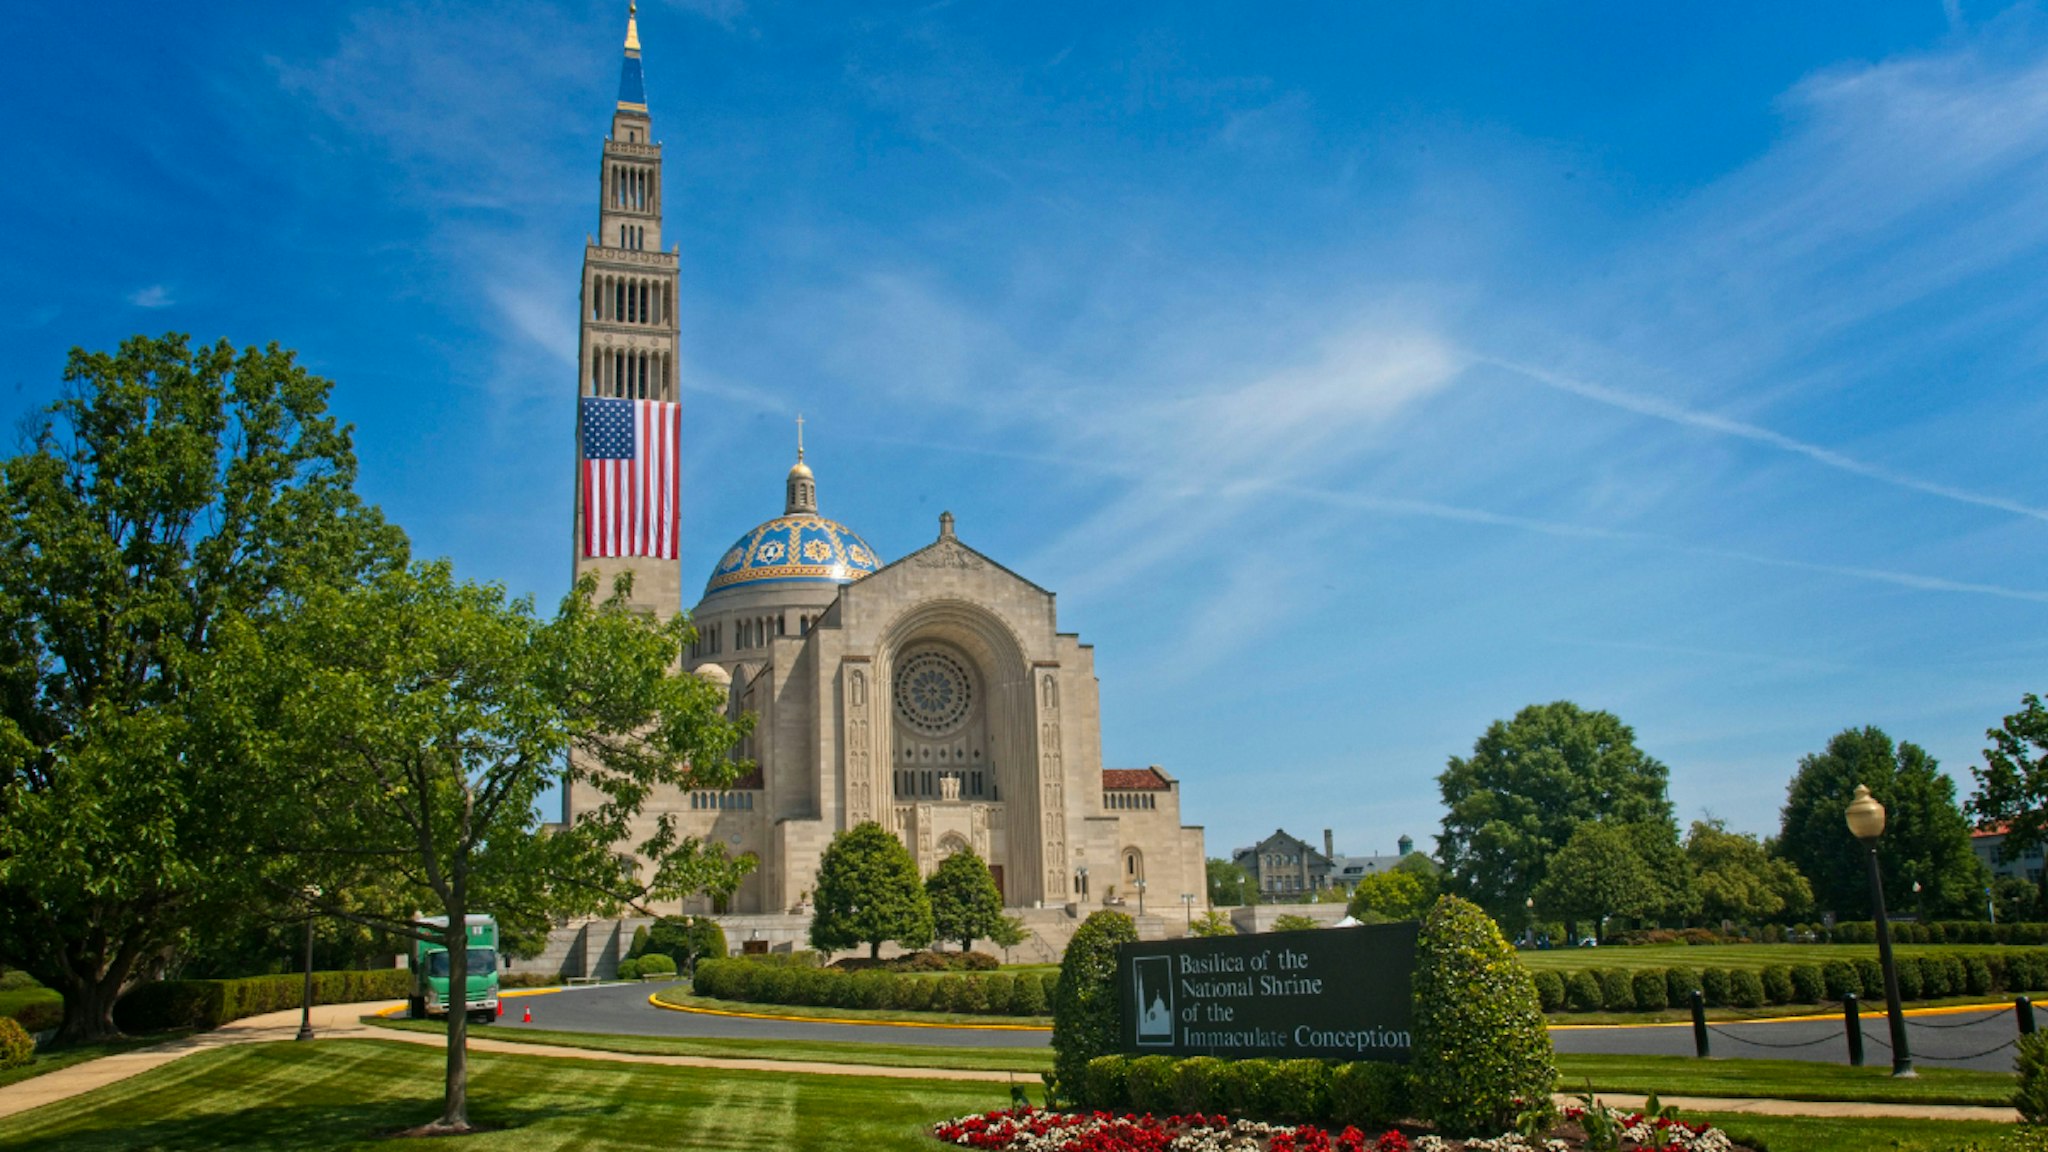 asilica of the National Shrine of the Immaculate Conception, Washington, D.C..